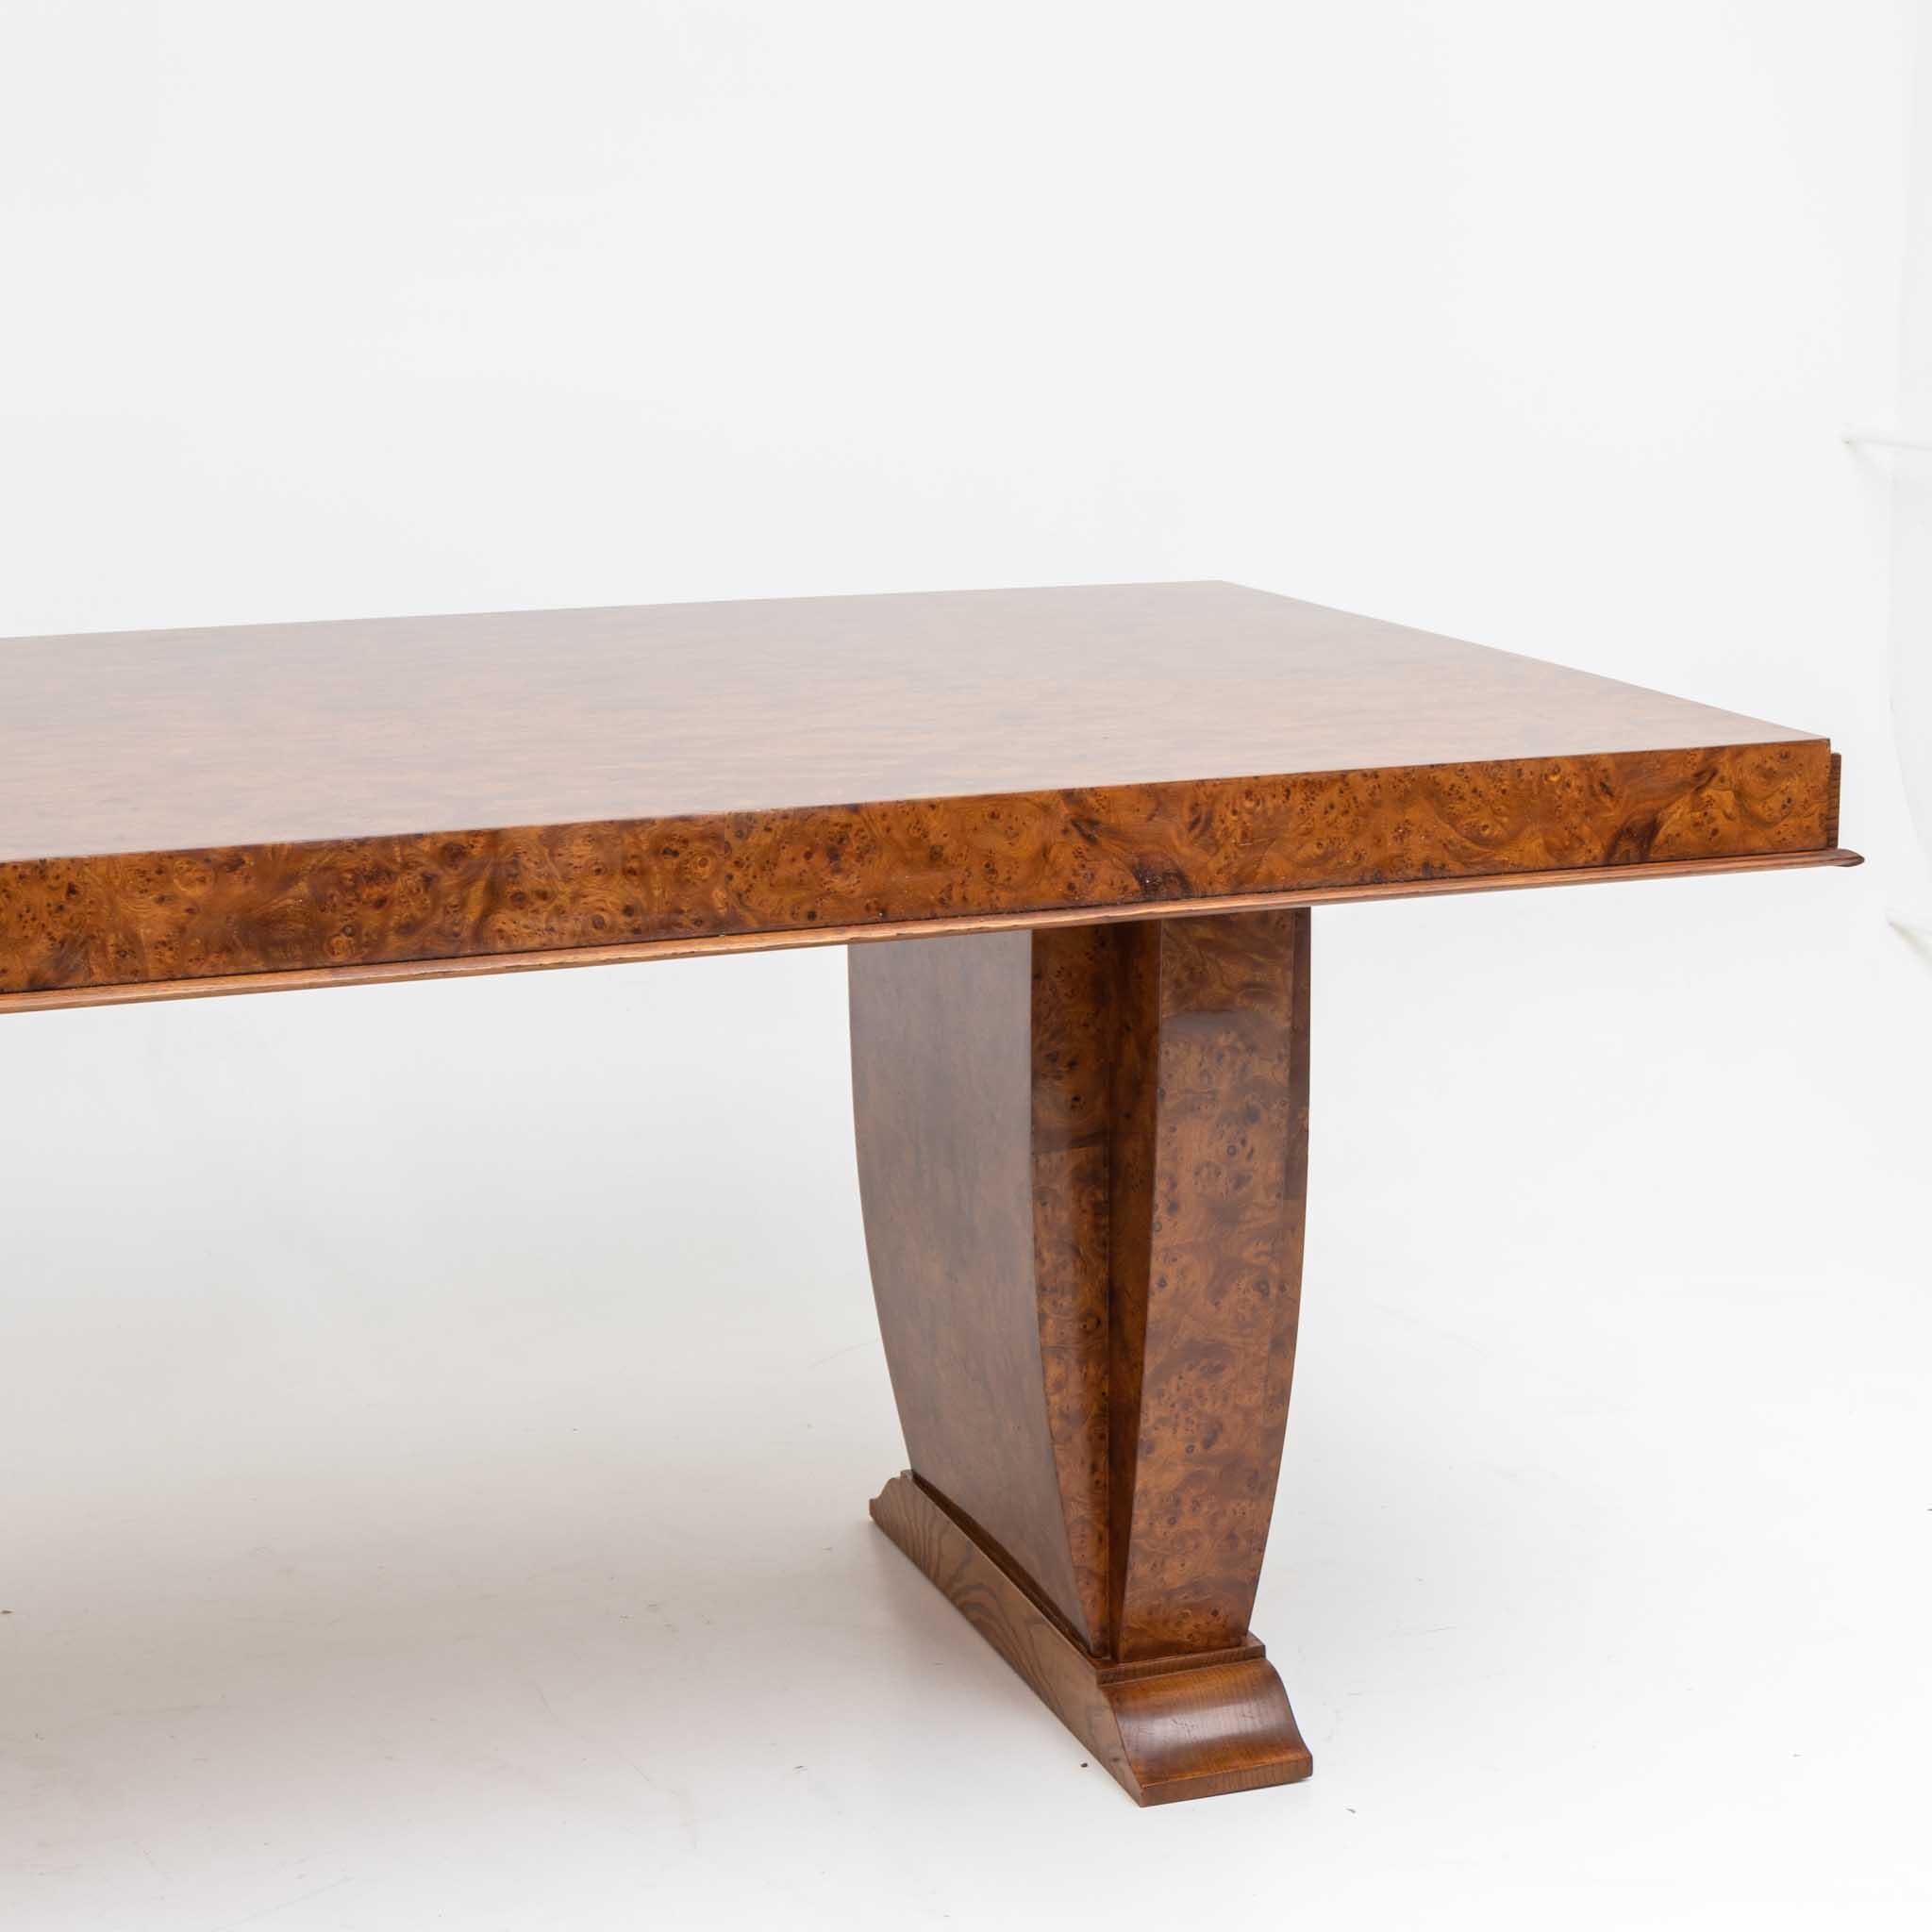 French Art Deco Thuja Root Veneered Dining Room Table, France, circa 1920